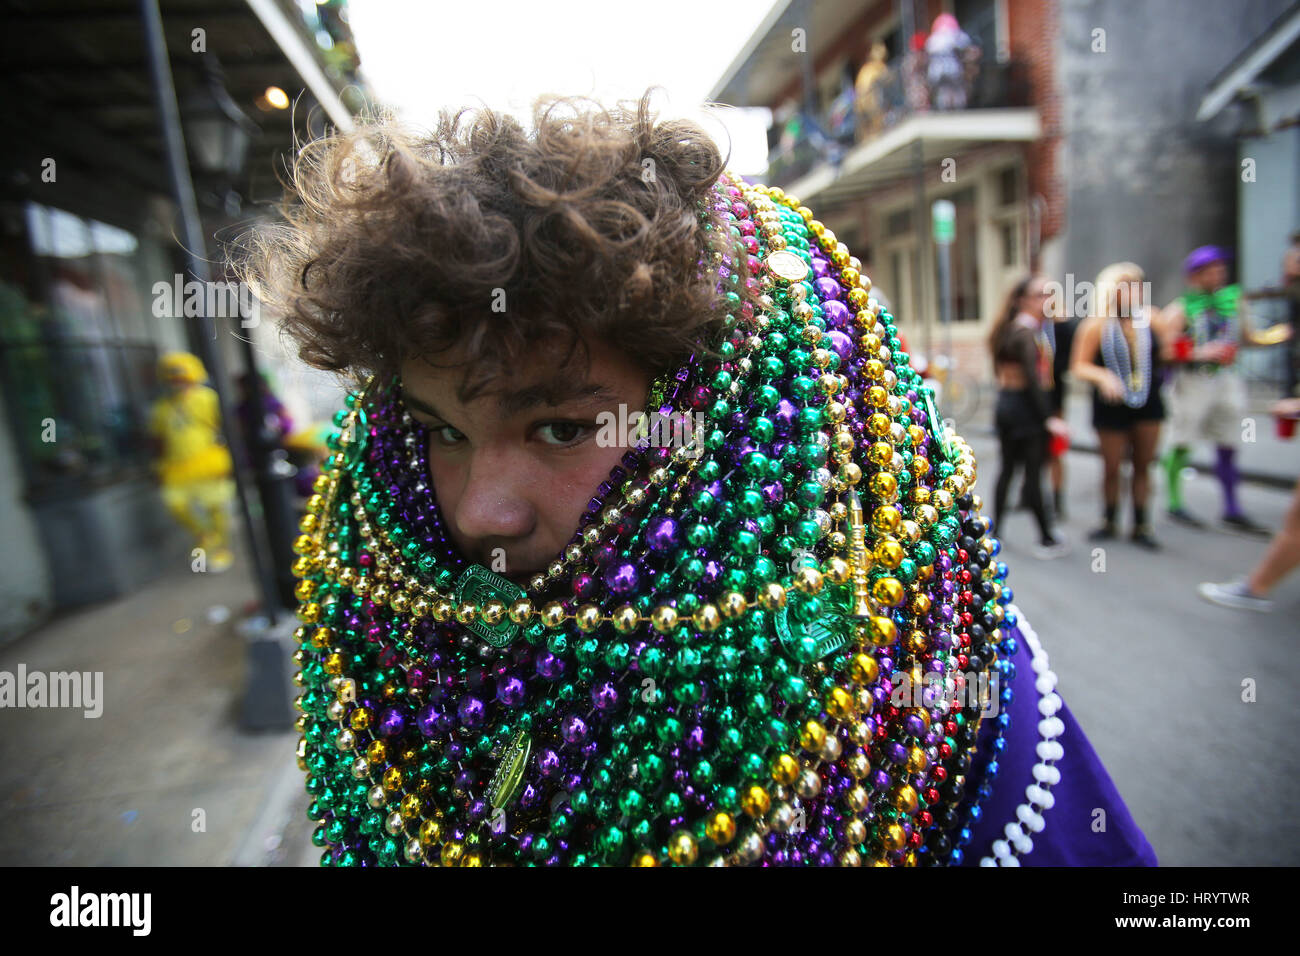 New Orleans, LOUISIANA, USA. 28th Feb, 2017. Xavier Cortez has his face  buried in beads in New Orleans, Louisiana USA on February 28, 2017. New  Orleans is celebrating Fat Tuesday, the last